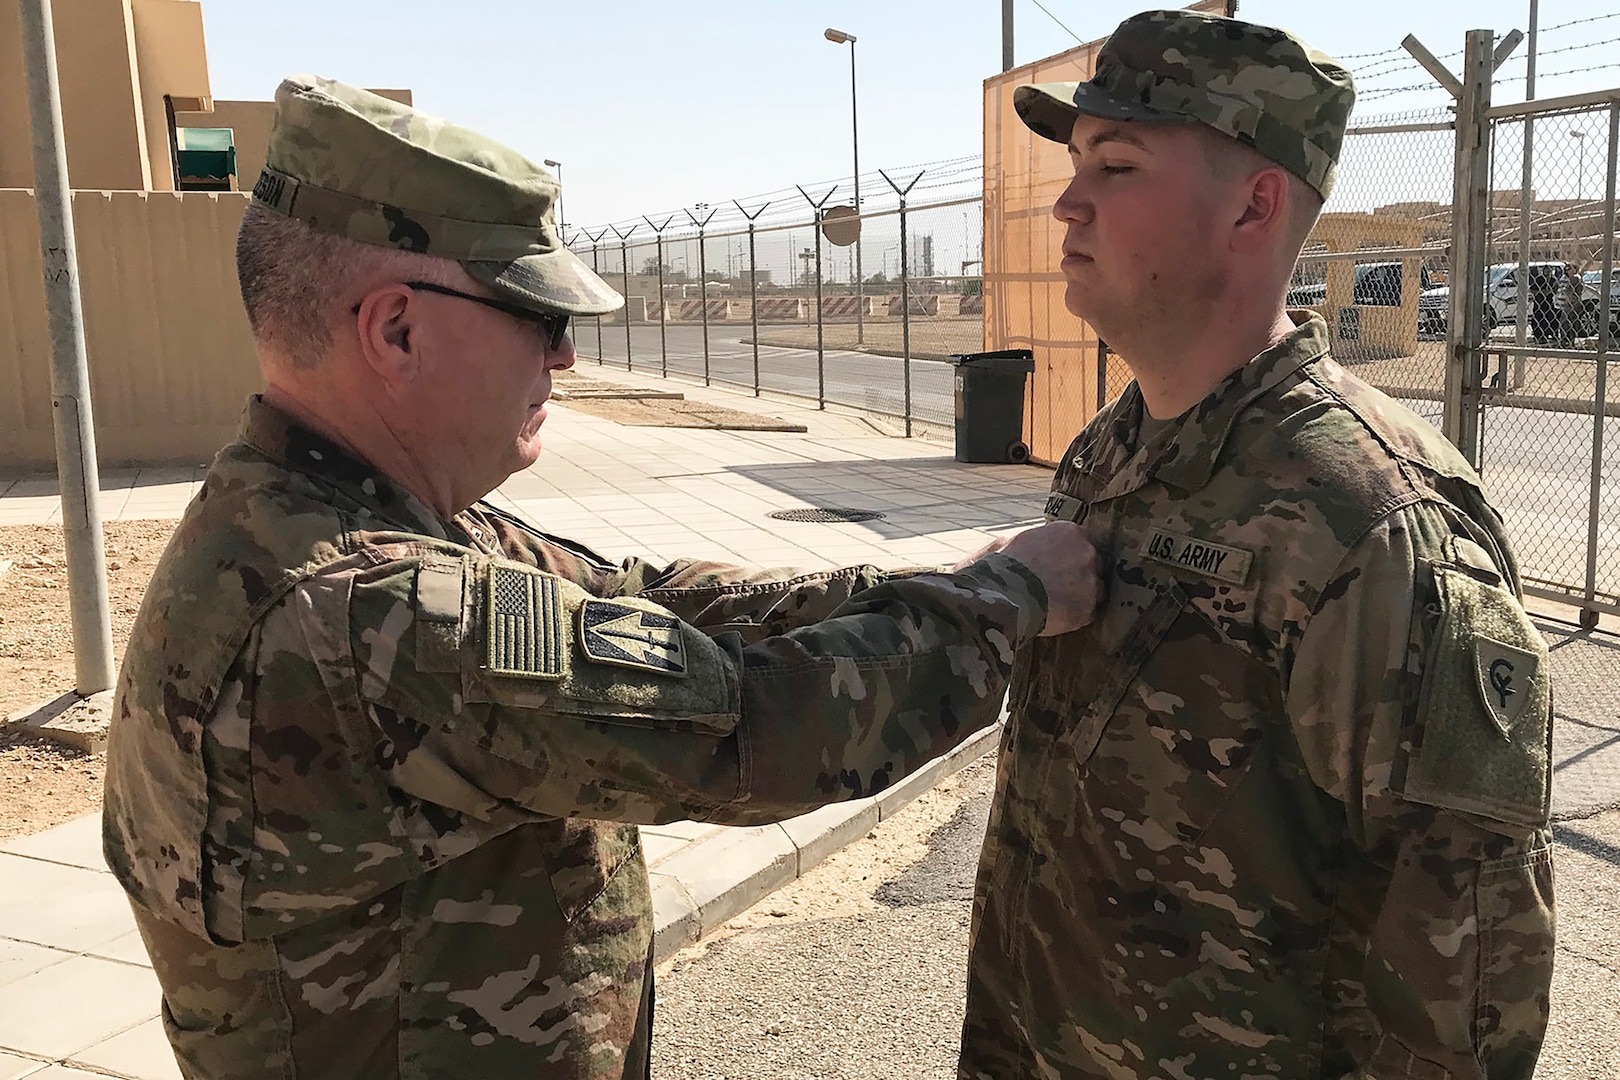 Indiana National Guard 1st Lt. Matthew Michael of Fort Wayne, a signal officer with the 38th Infantry Division, receives his new rank during his promotion ceremony in Saudi Arabia, Monday, Oct. 21, 2019. Michael is one of about 600 division soldiers who deployed to the Middle East in May to support Task Force Spartan, which helps strengthen defense relationships and build partner capacity within the region.